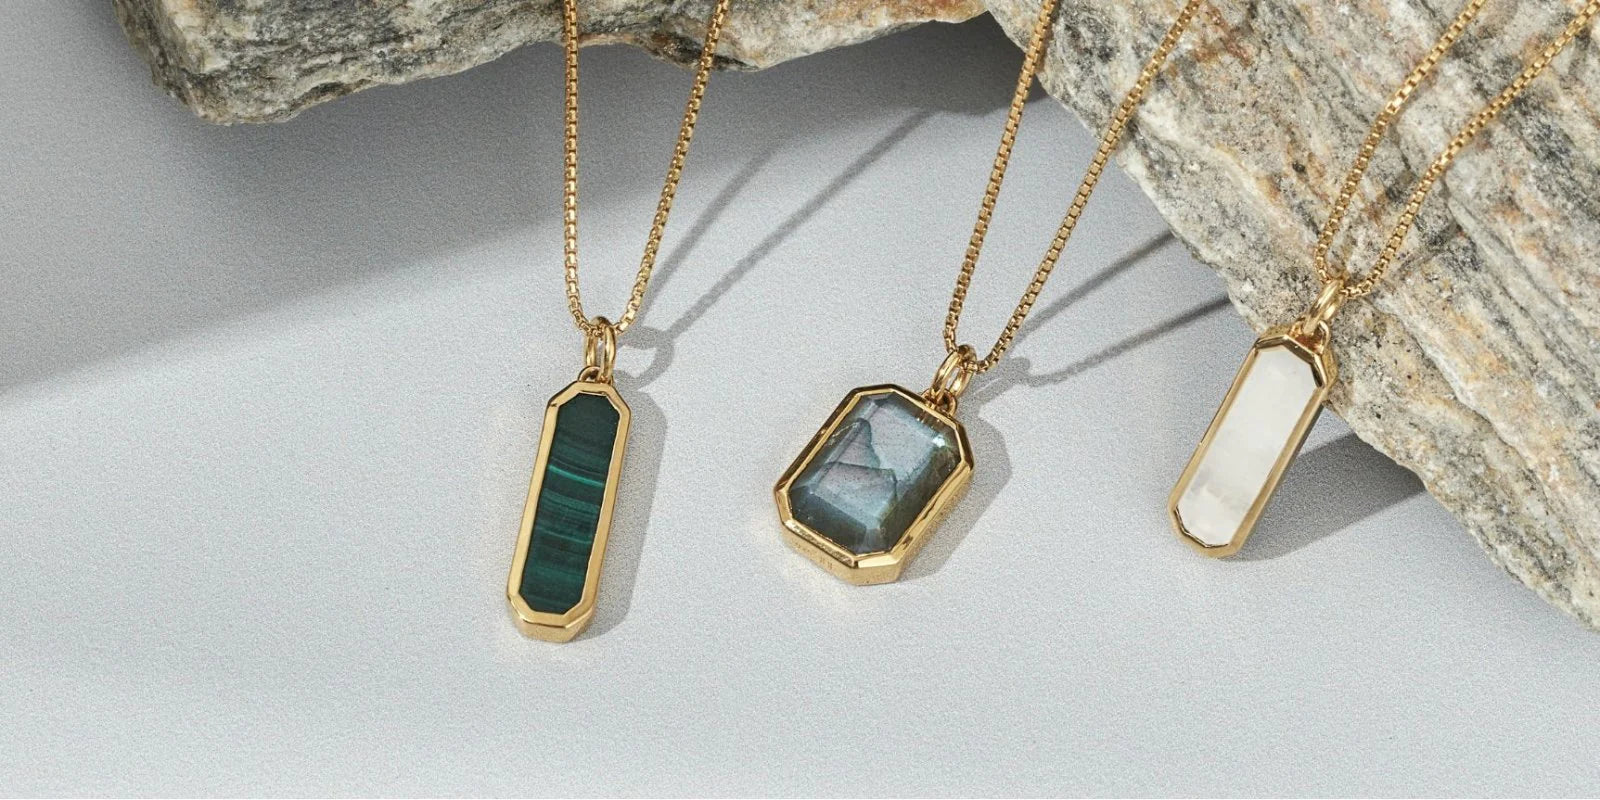 PENDANT CHARMS & CHAINS - 18k Gold & Recycled Silver gemstone jewellery